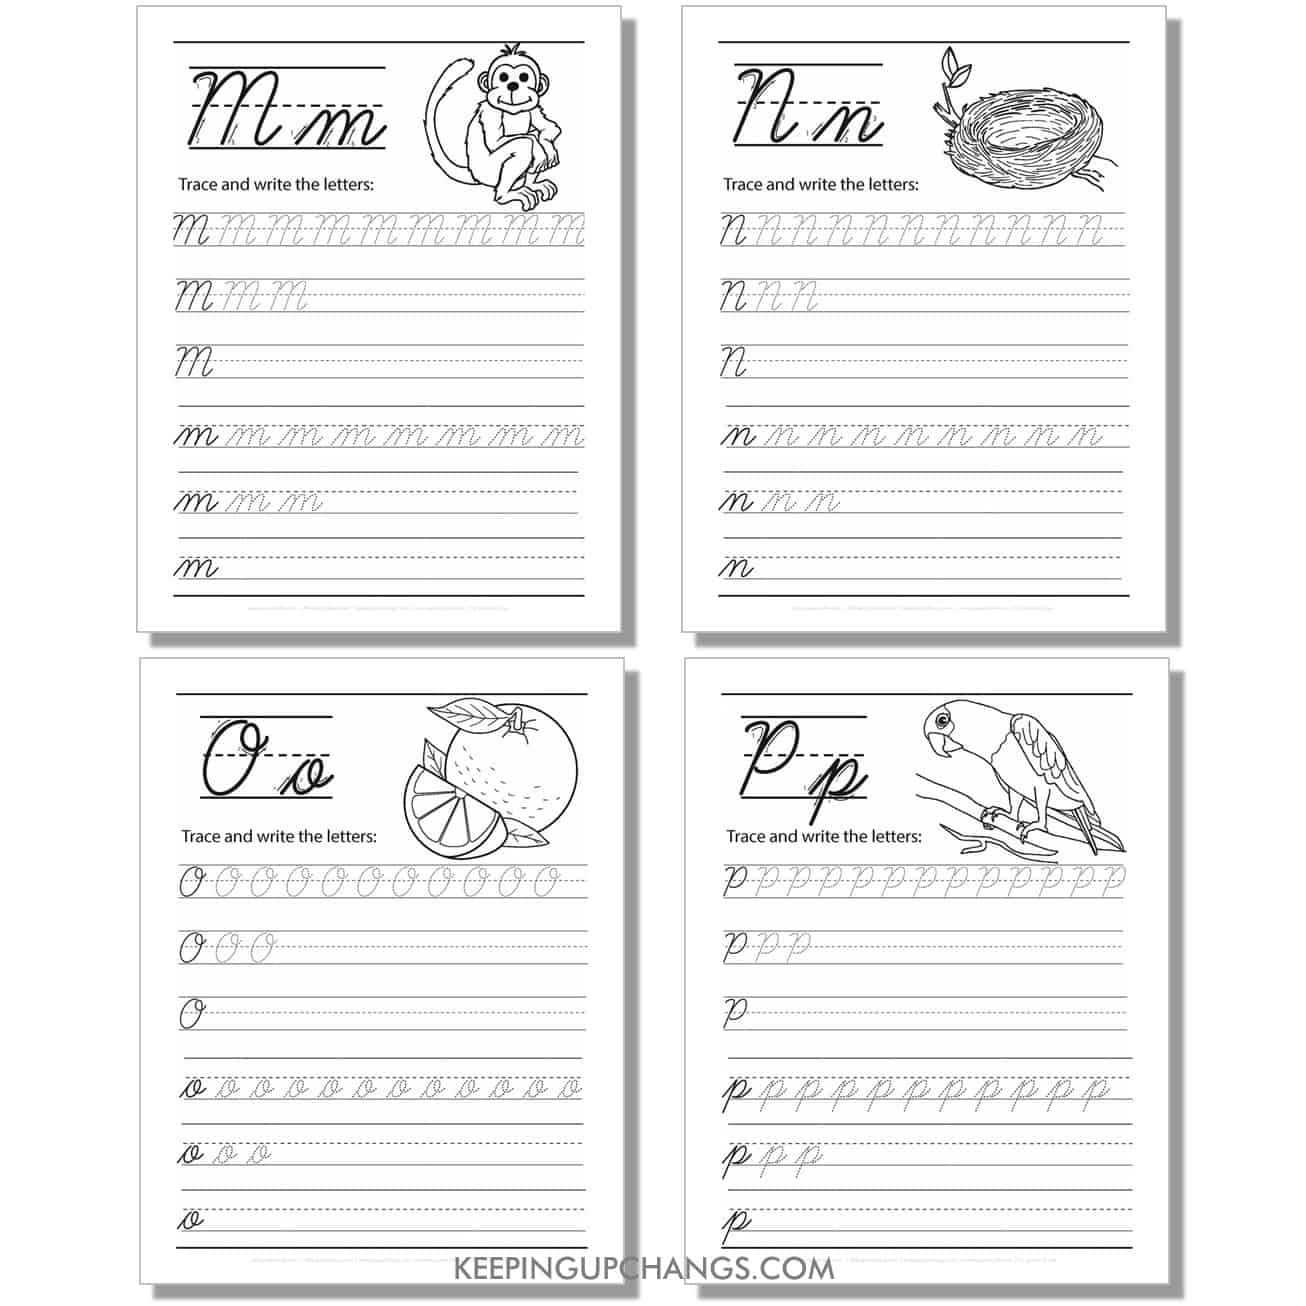 cursive worksheet with uppercase, lowercase letters for m, n, o, p.